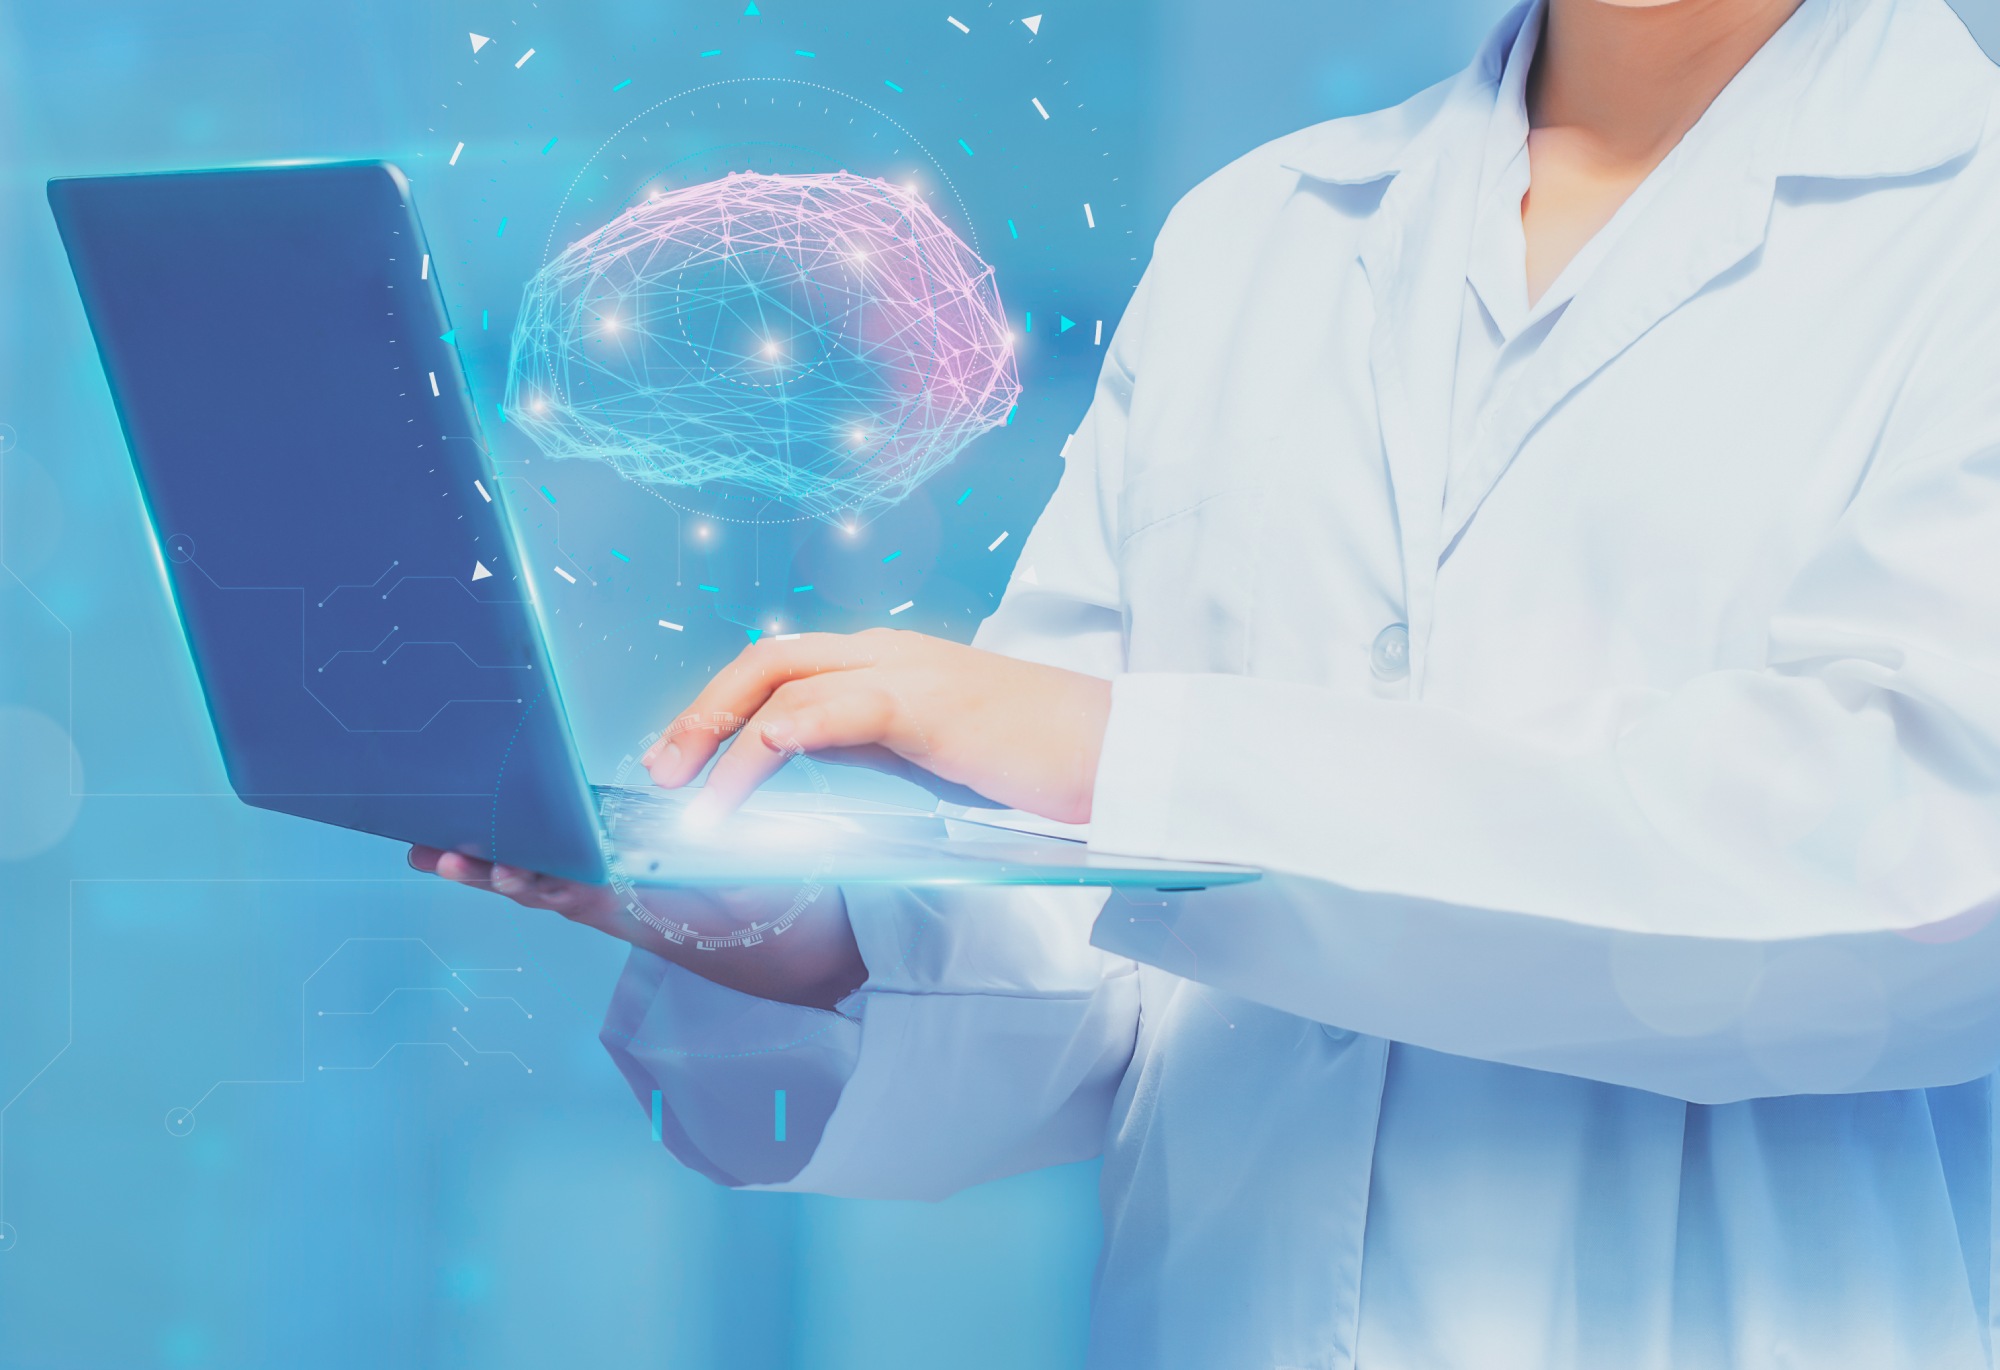 Woman doctor holding futuristic computer with virtual screen interface holographic digital brain on laptop,concept digital healthcare connection and medical innovative technology and science